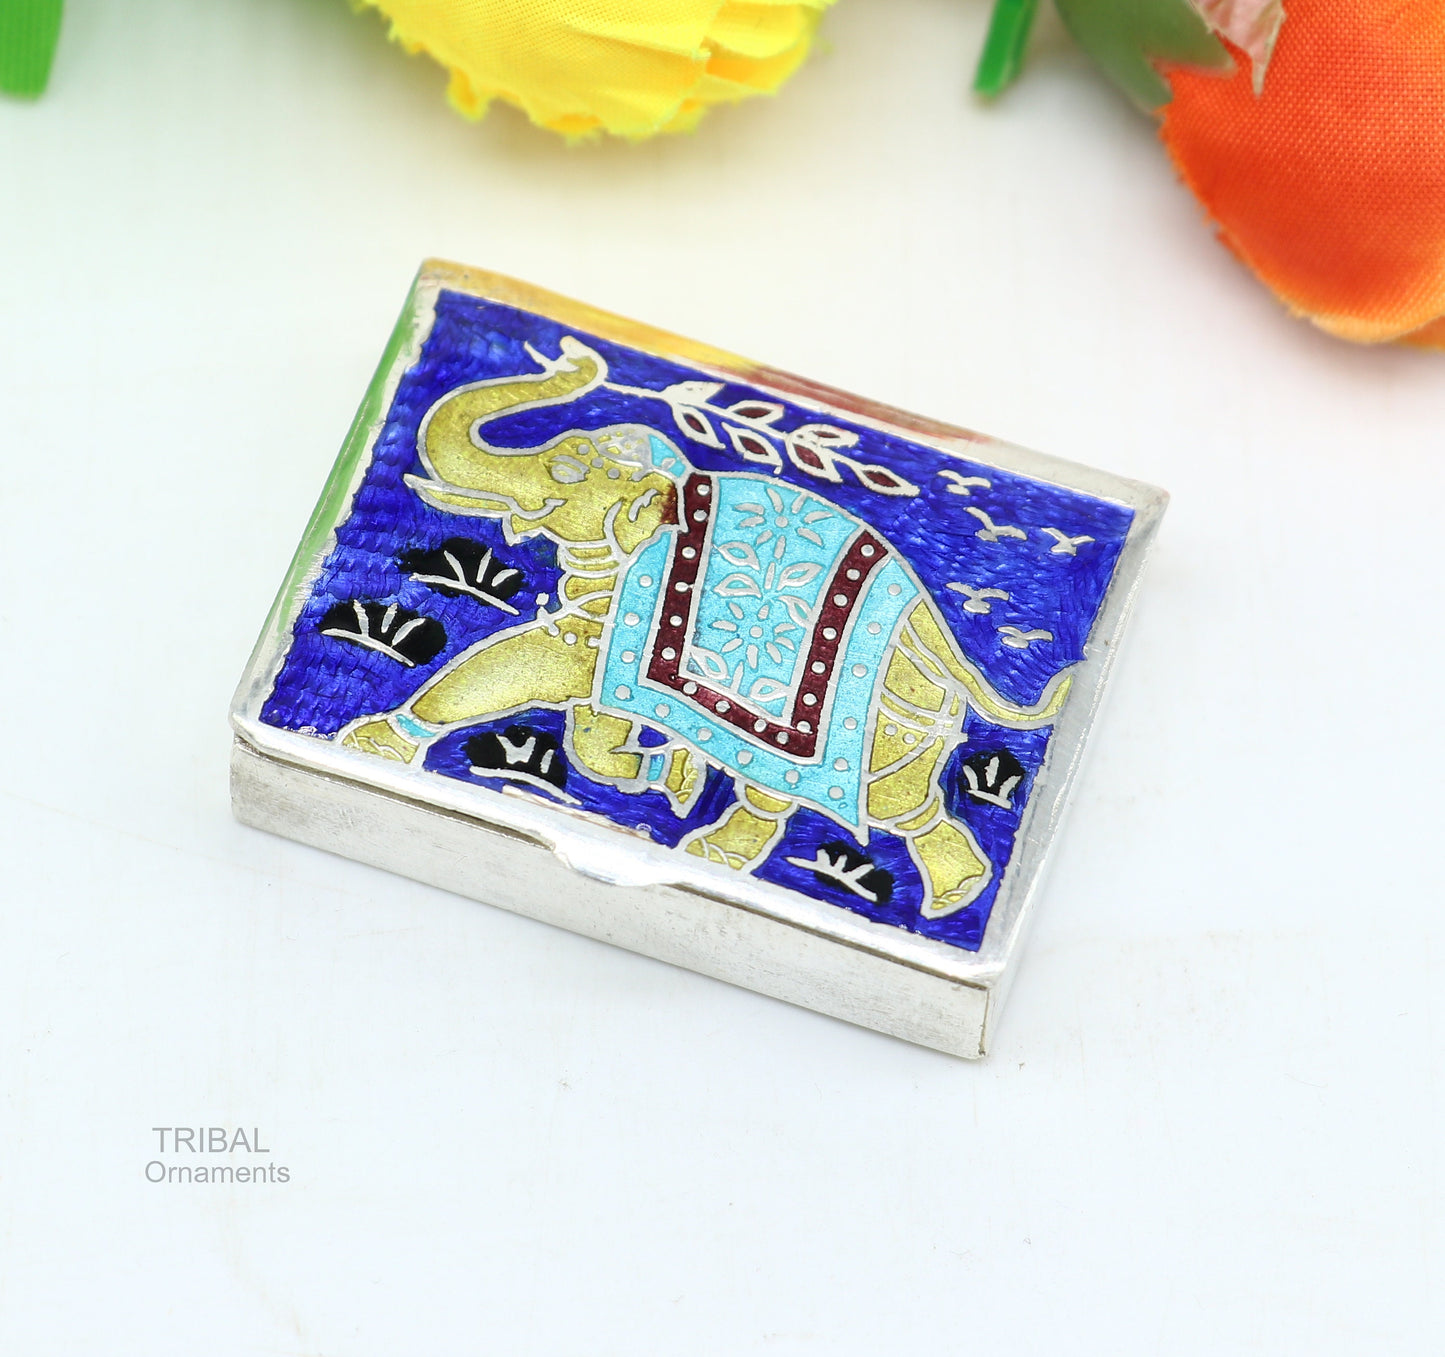 925 Sterling silver handmade trinket box, solid container box, casket box, sindoor box, enamel elephant work customized gifting box stb333 - TRIBAL ORNAMENTS